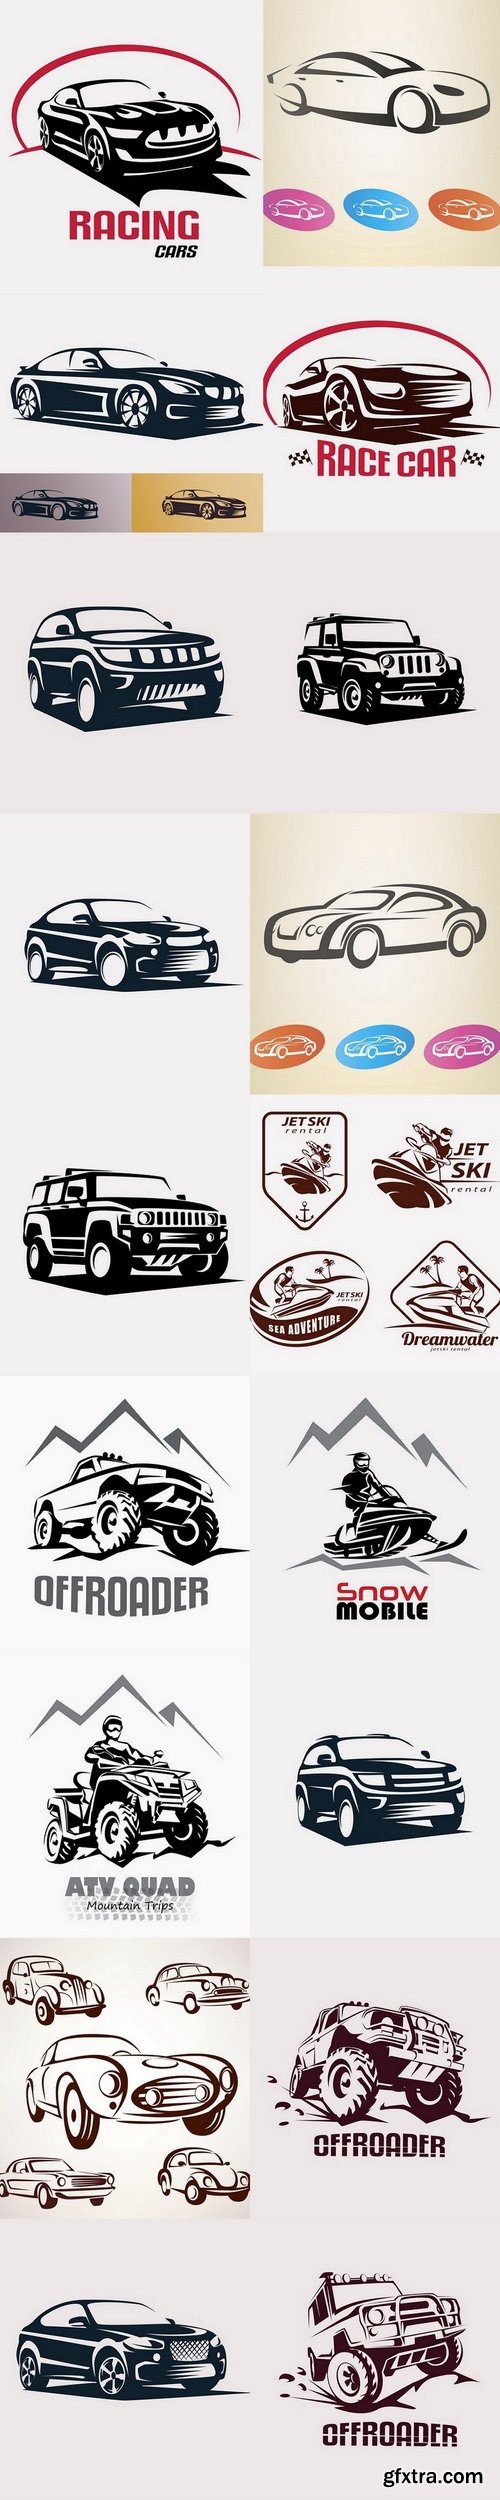 Offroad suv car monochrome template for labels, emblems, badges